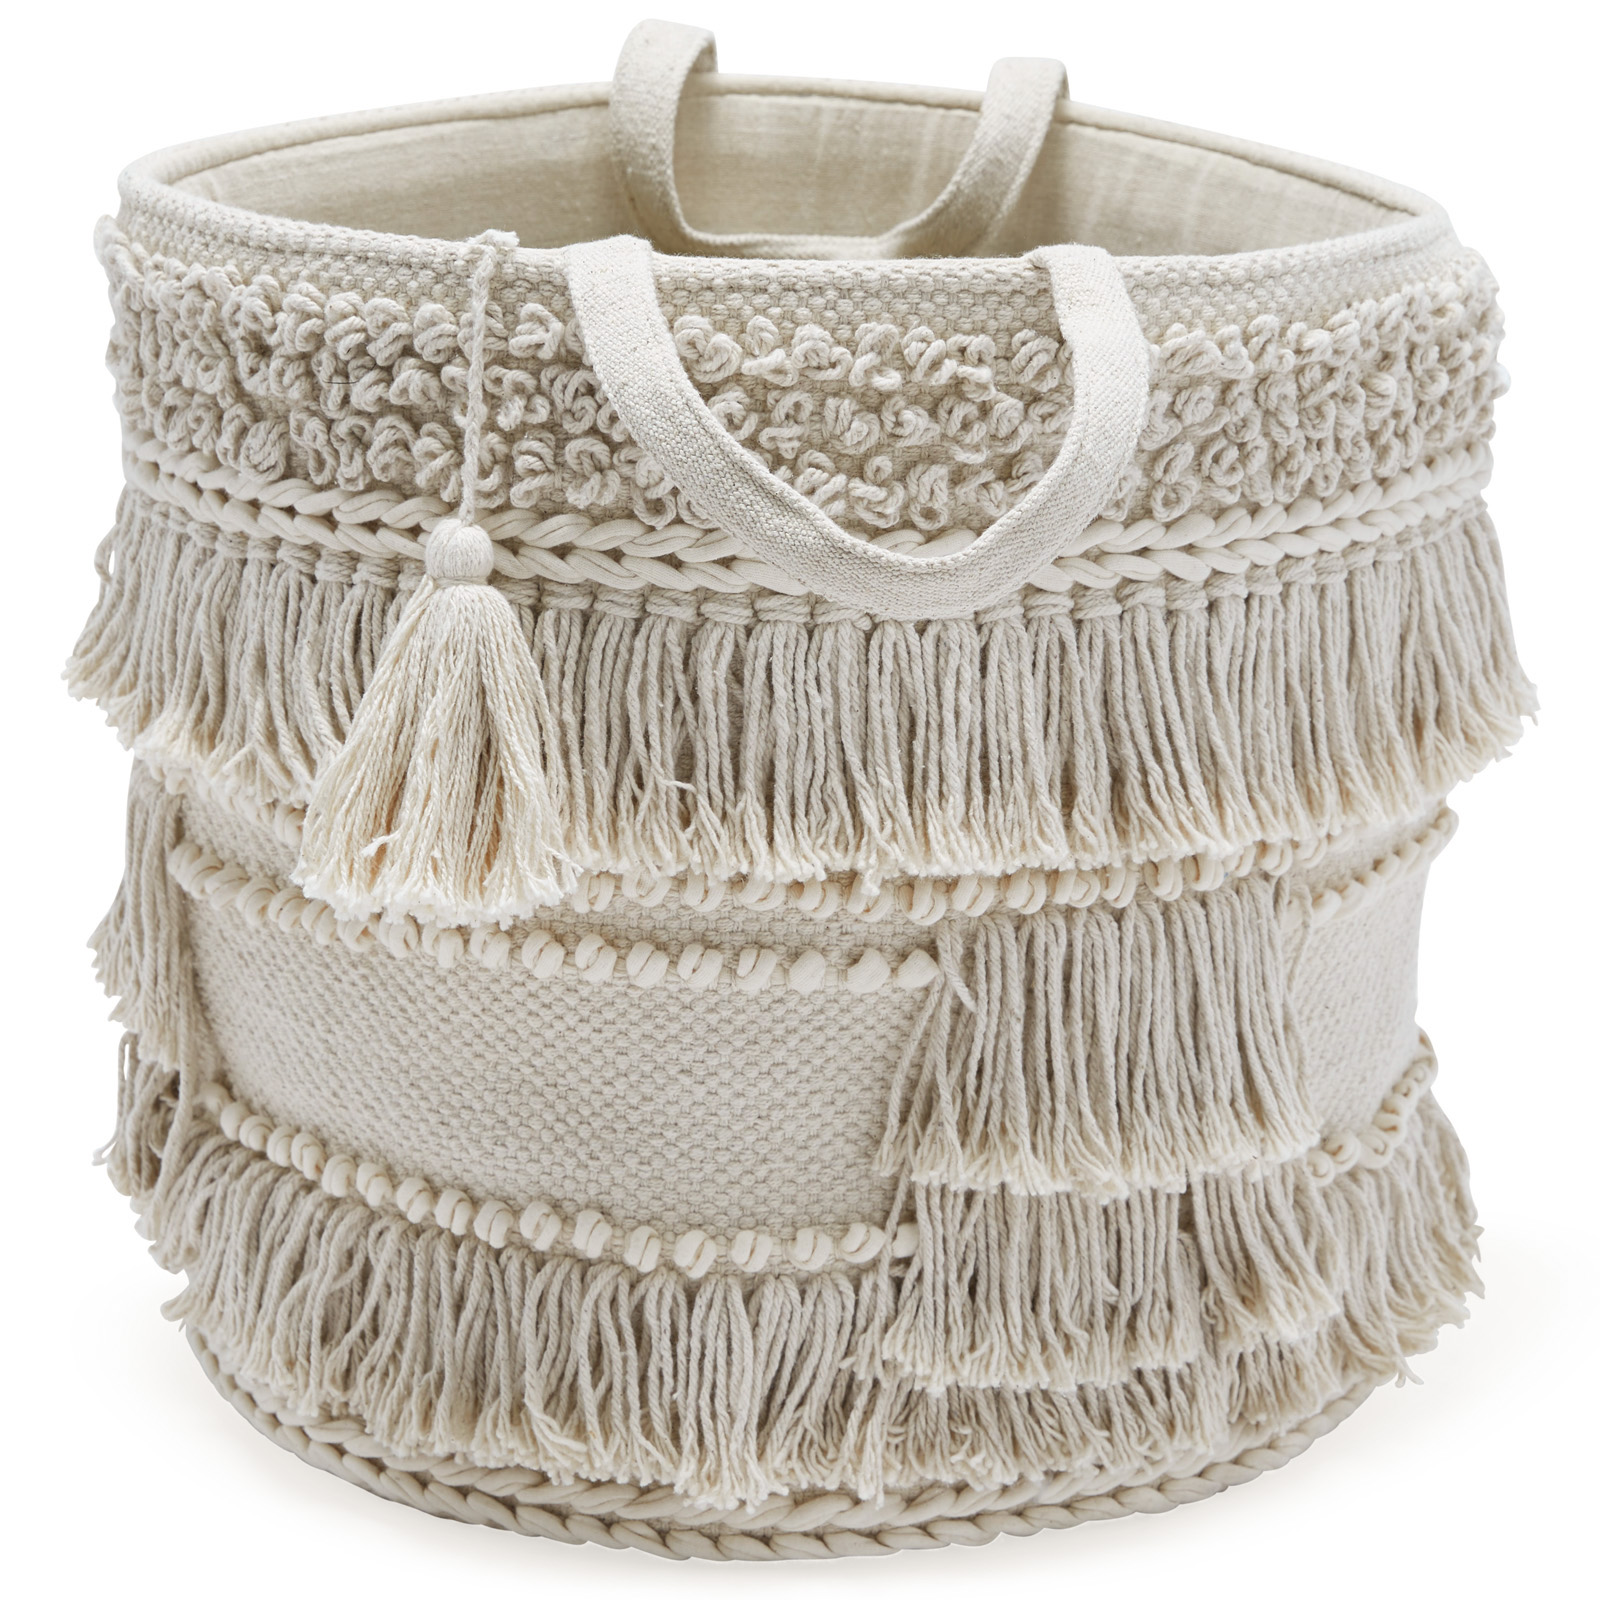 Hand Woven Macrame 3 Piece Basket Set, Natural by Drew Barrymore Flower Home - image 3 of 8